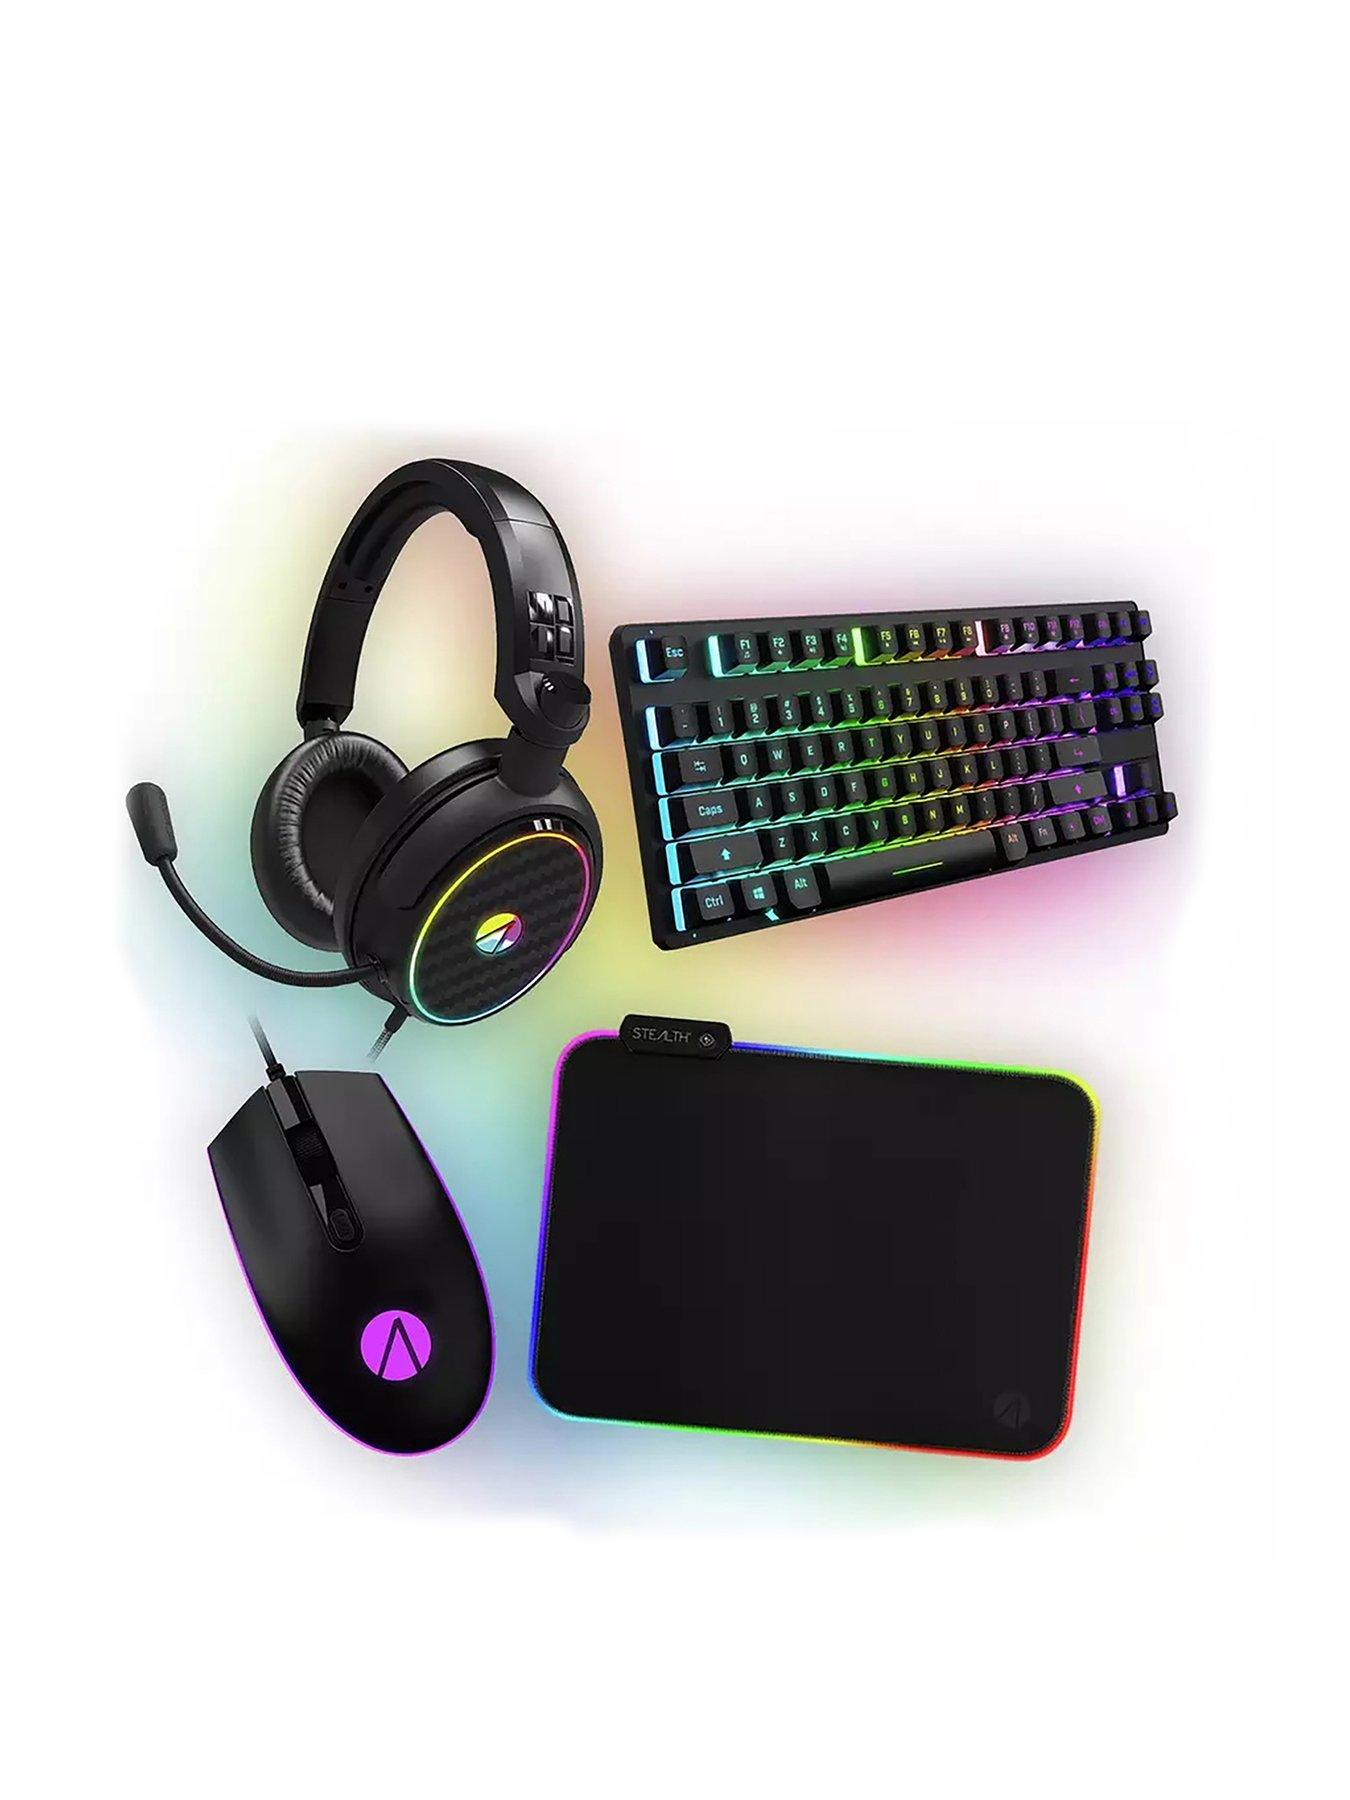 LED Bundle Gaming 4-in-1 Headset Stealth Mouse Mouse, Light Gaming Up - Keyboard, Pad, C6-100